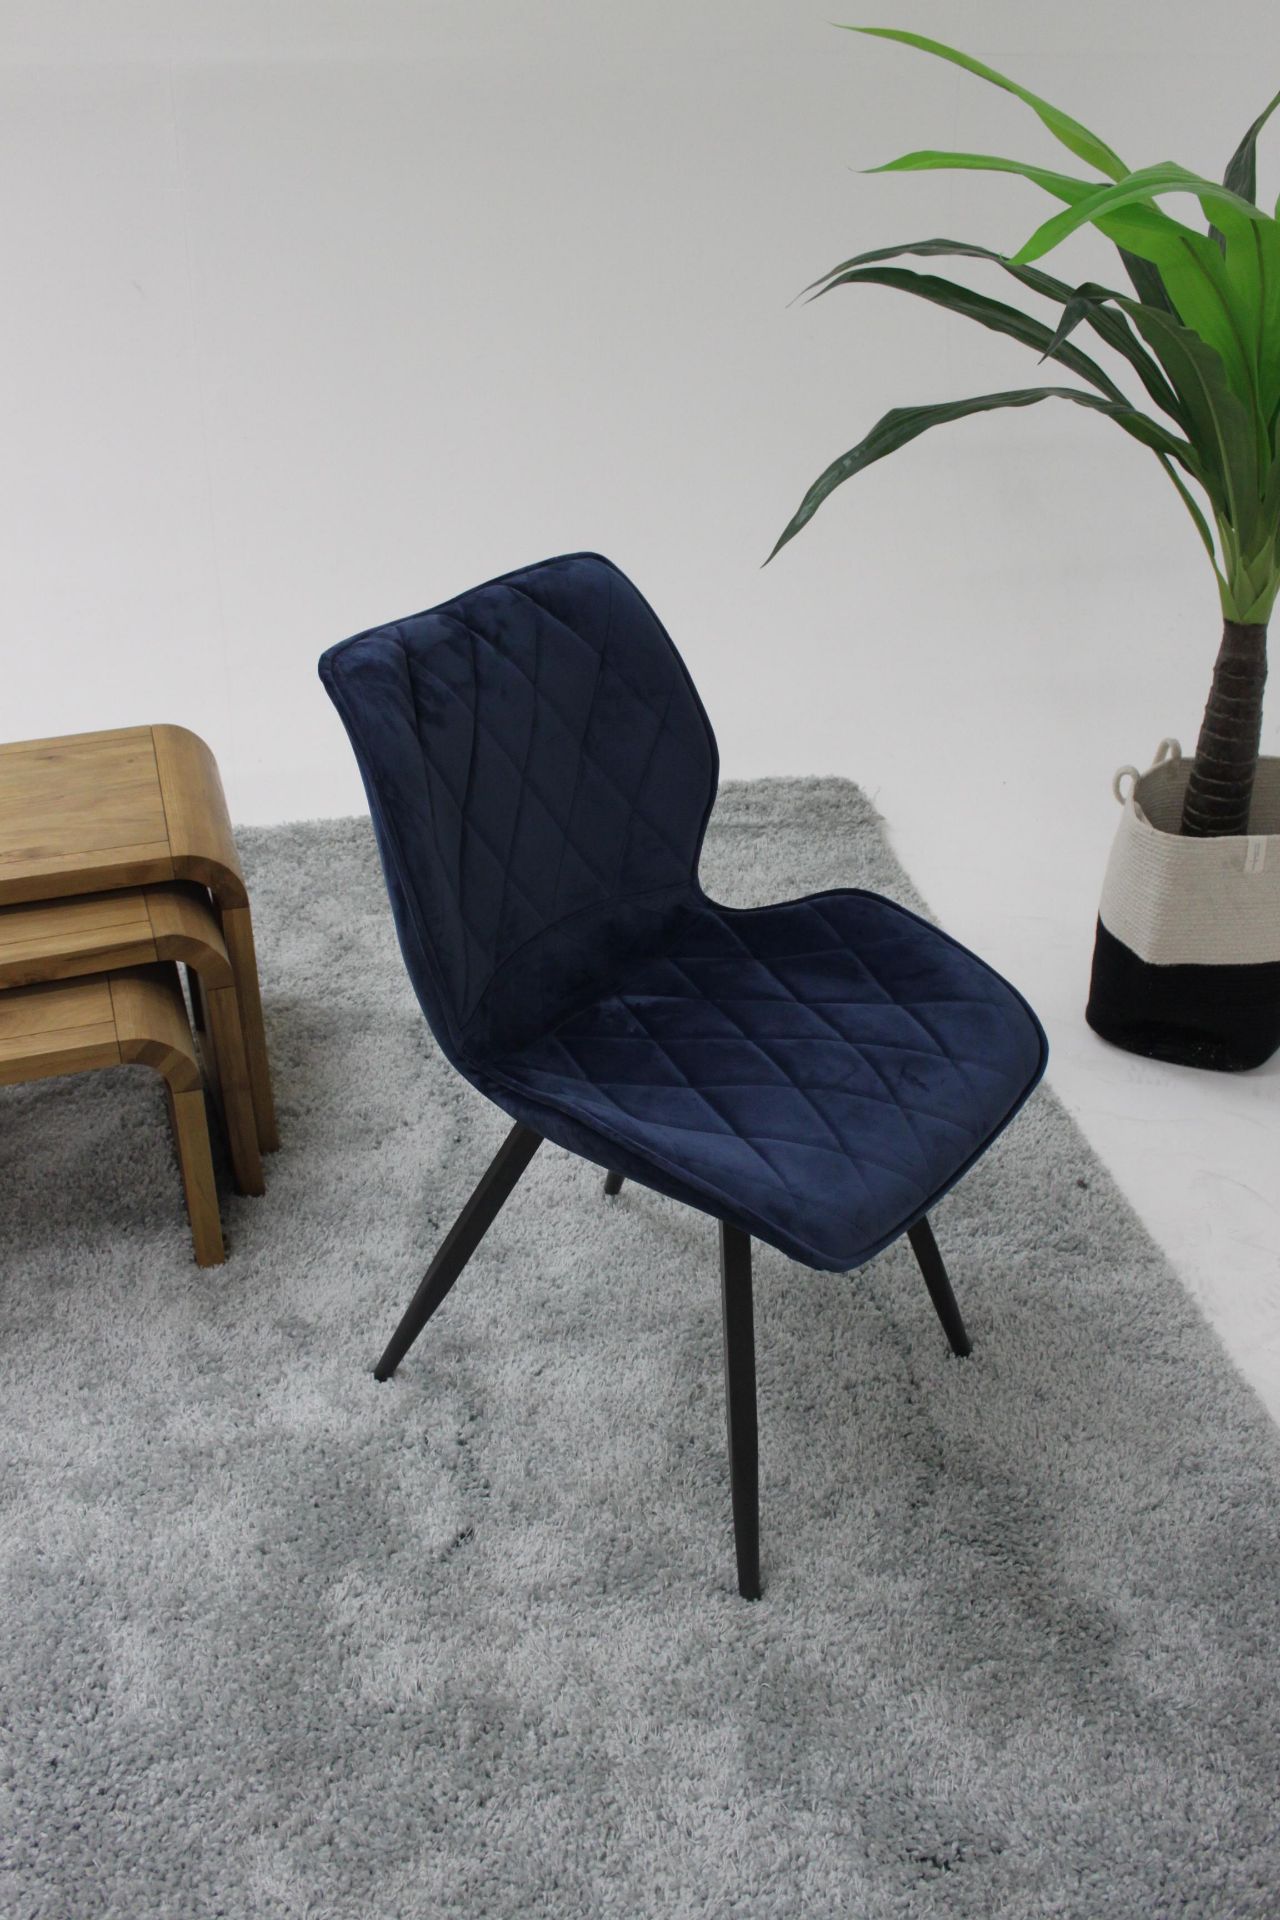 Alfa Diamond Dining Chair Blue Diamond Quilted Upholstery Gives A Luxury Finish To These Stylish - Image 3 of 3